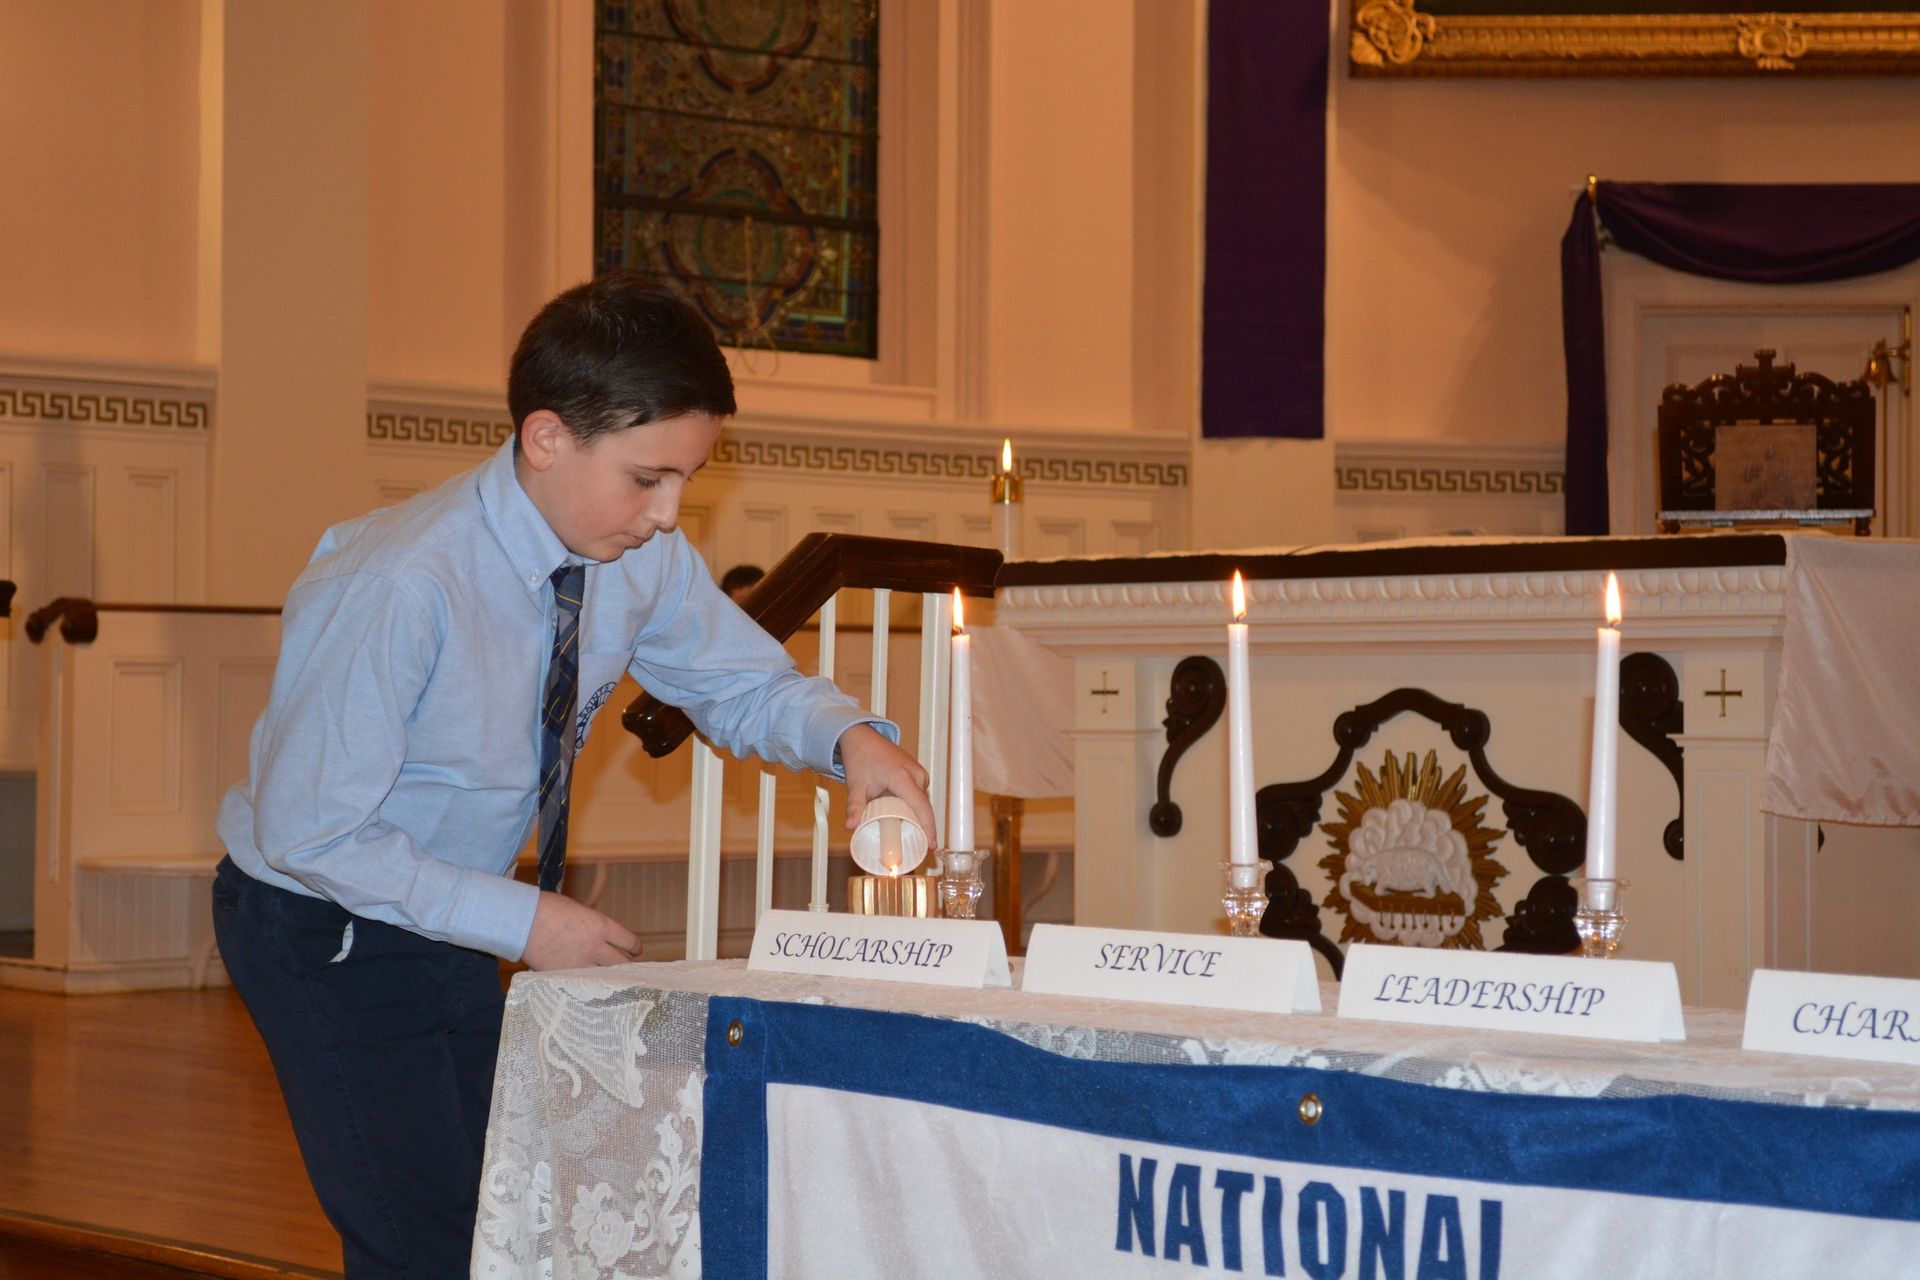 A boy lighting candles in front of a national banner